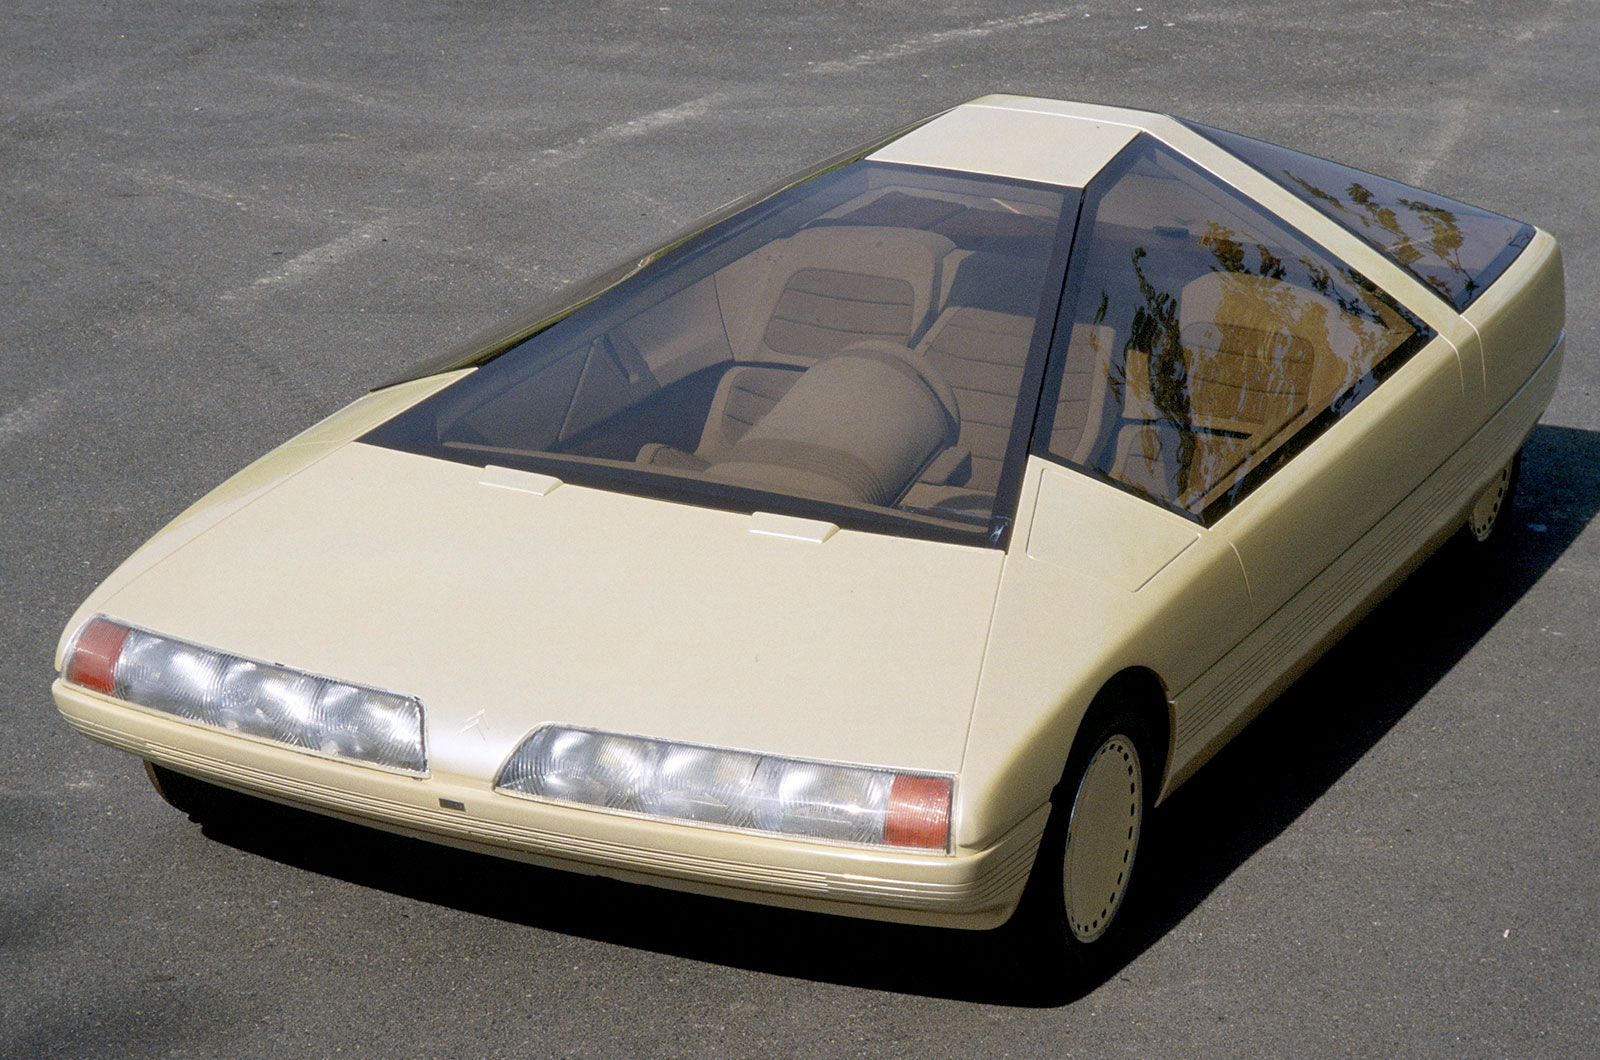 <p>The Citroën Karin was the work of <strong>Trevor Fiore </strong>(born 1937), who presumably had overdosed on Toblerone at the point that he penned this rather triangular concept. With a central driving position, the driver was flanked by a passenger on either side and behind, McLaren F1-style.</p>